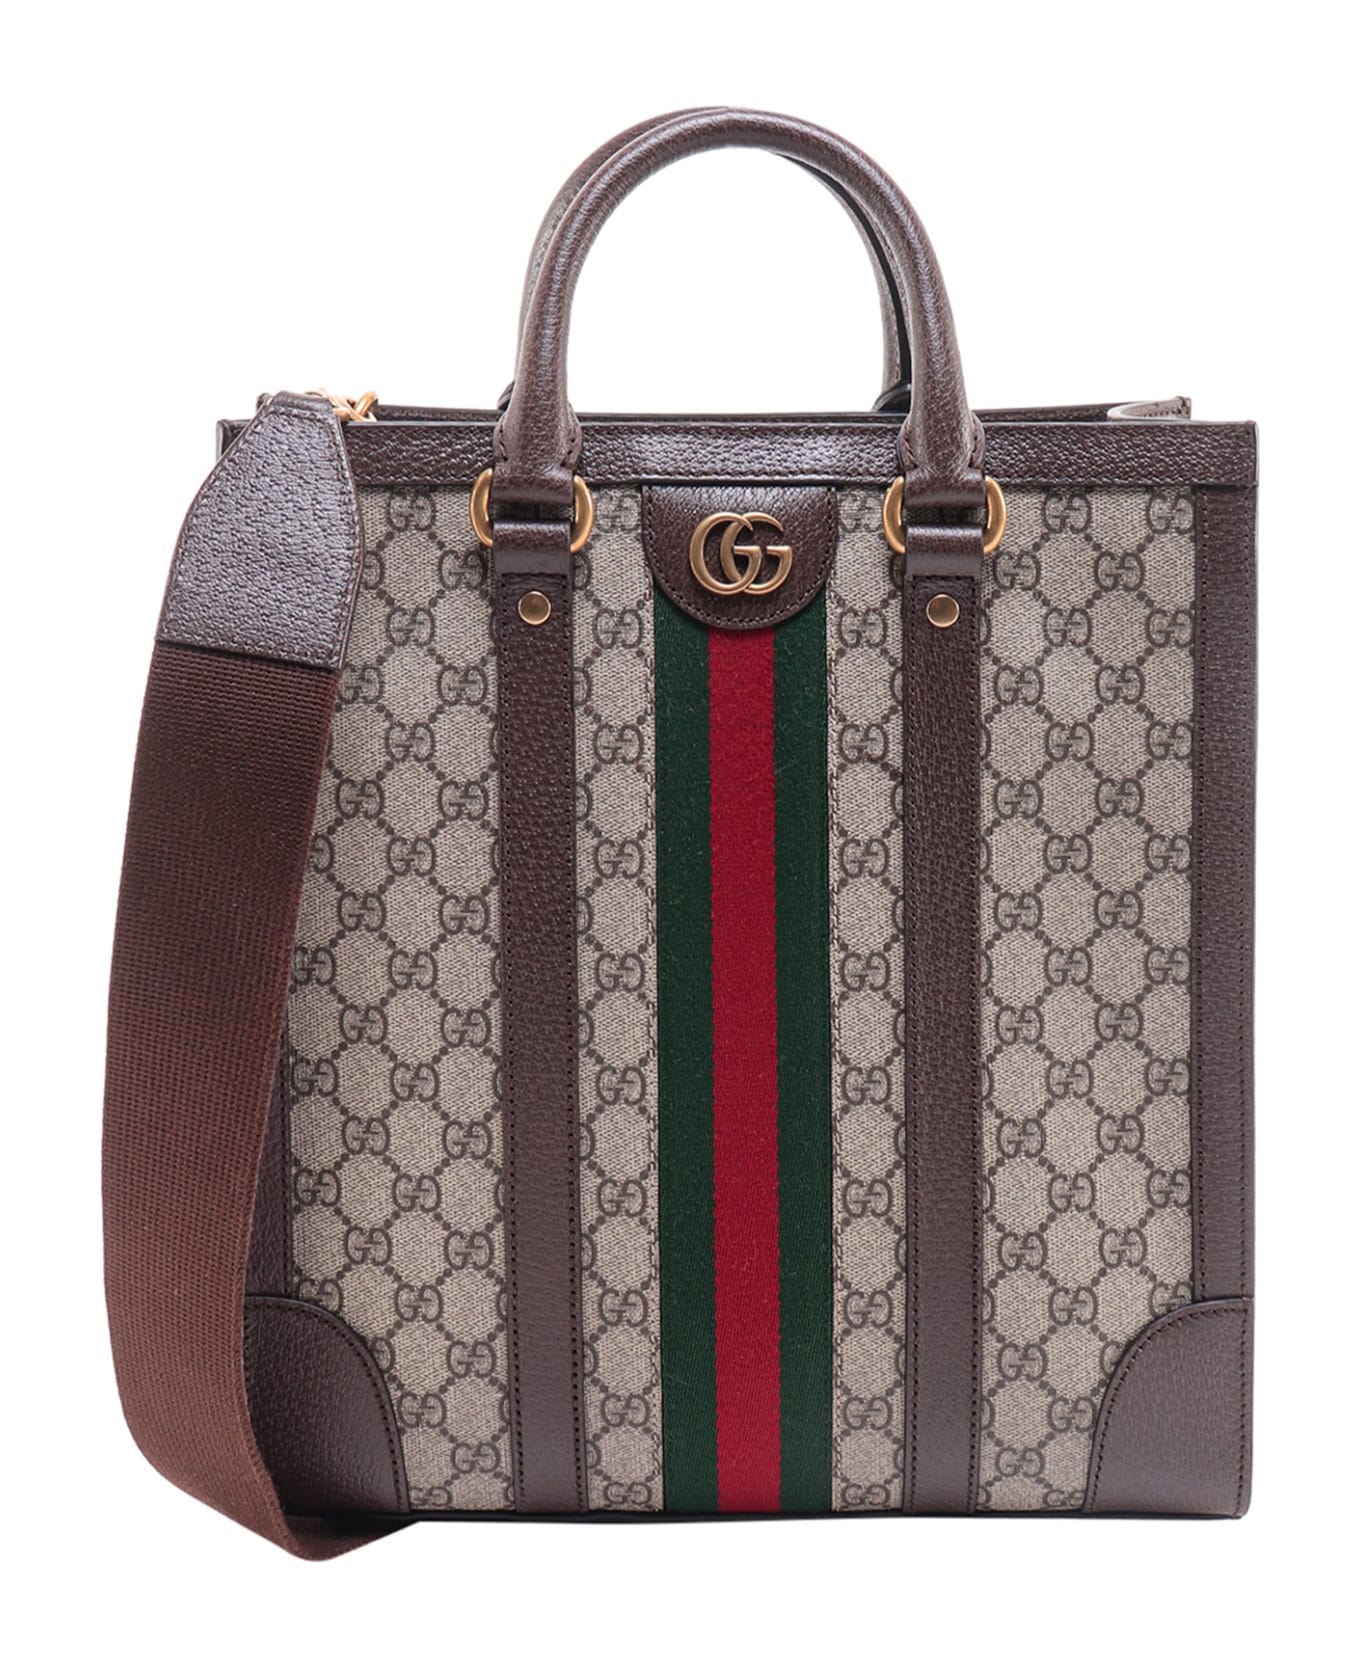 Gucci Ophidia Tote Bag - Brown トートバッグ